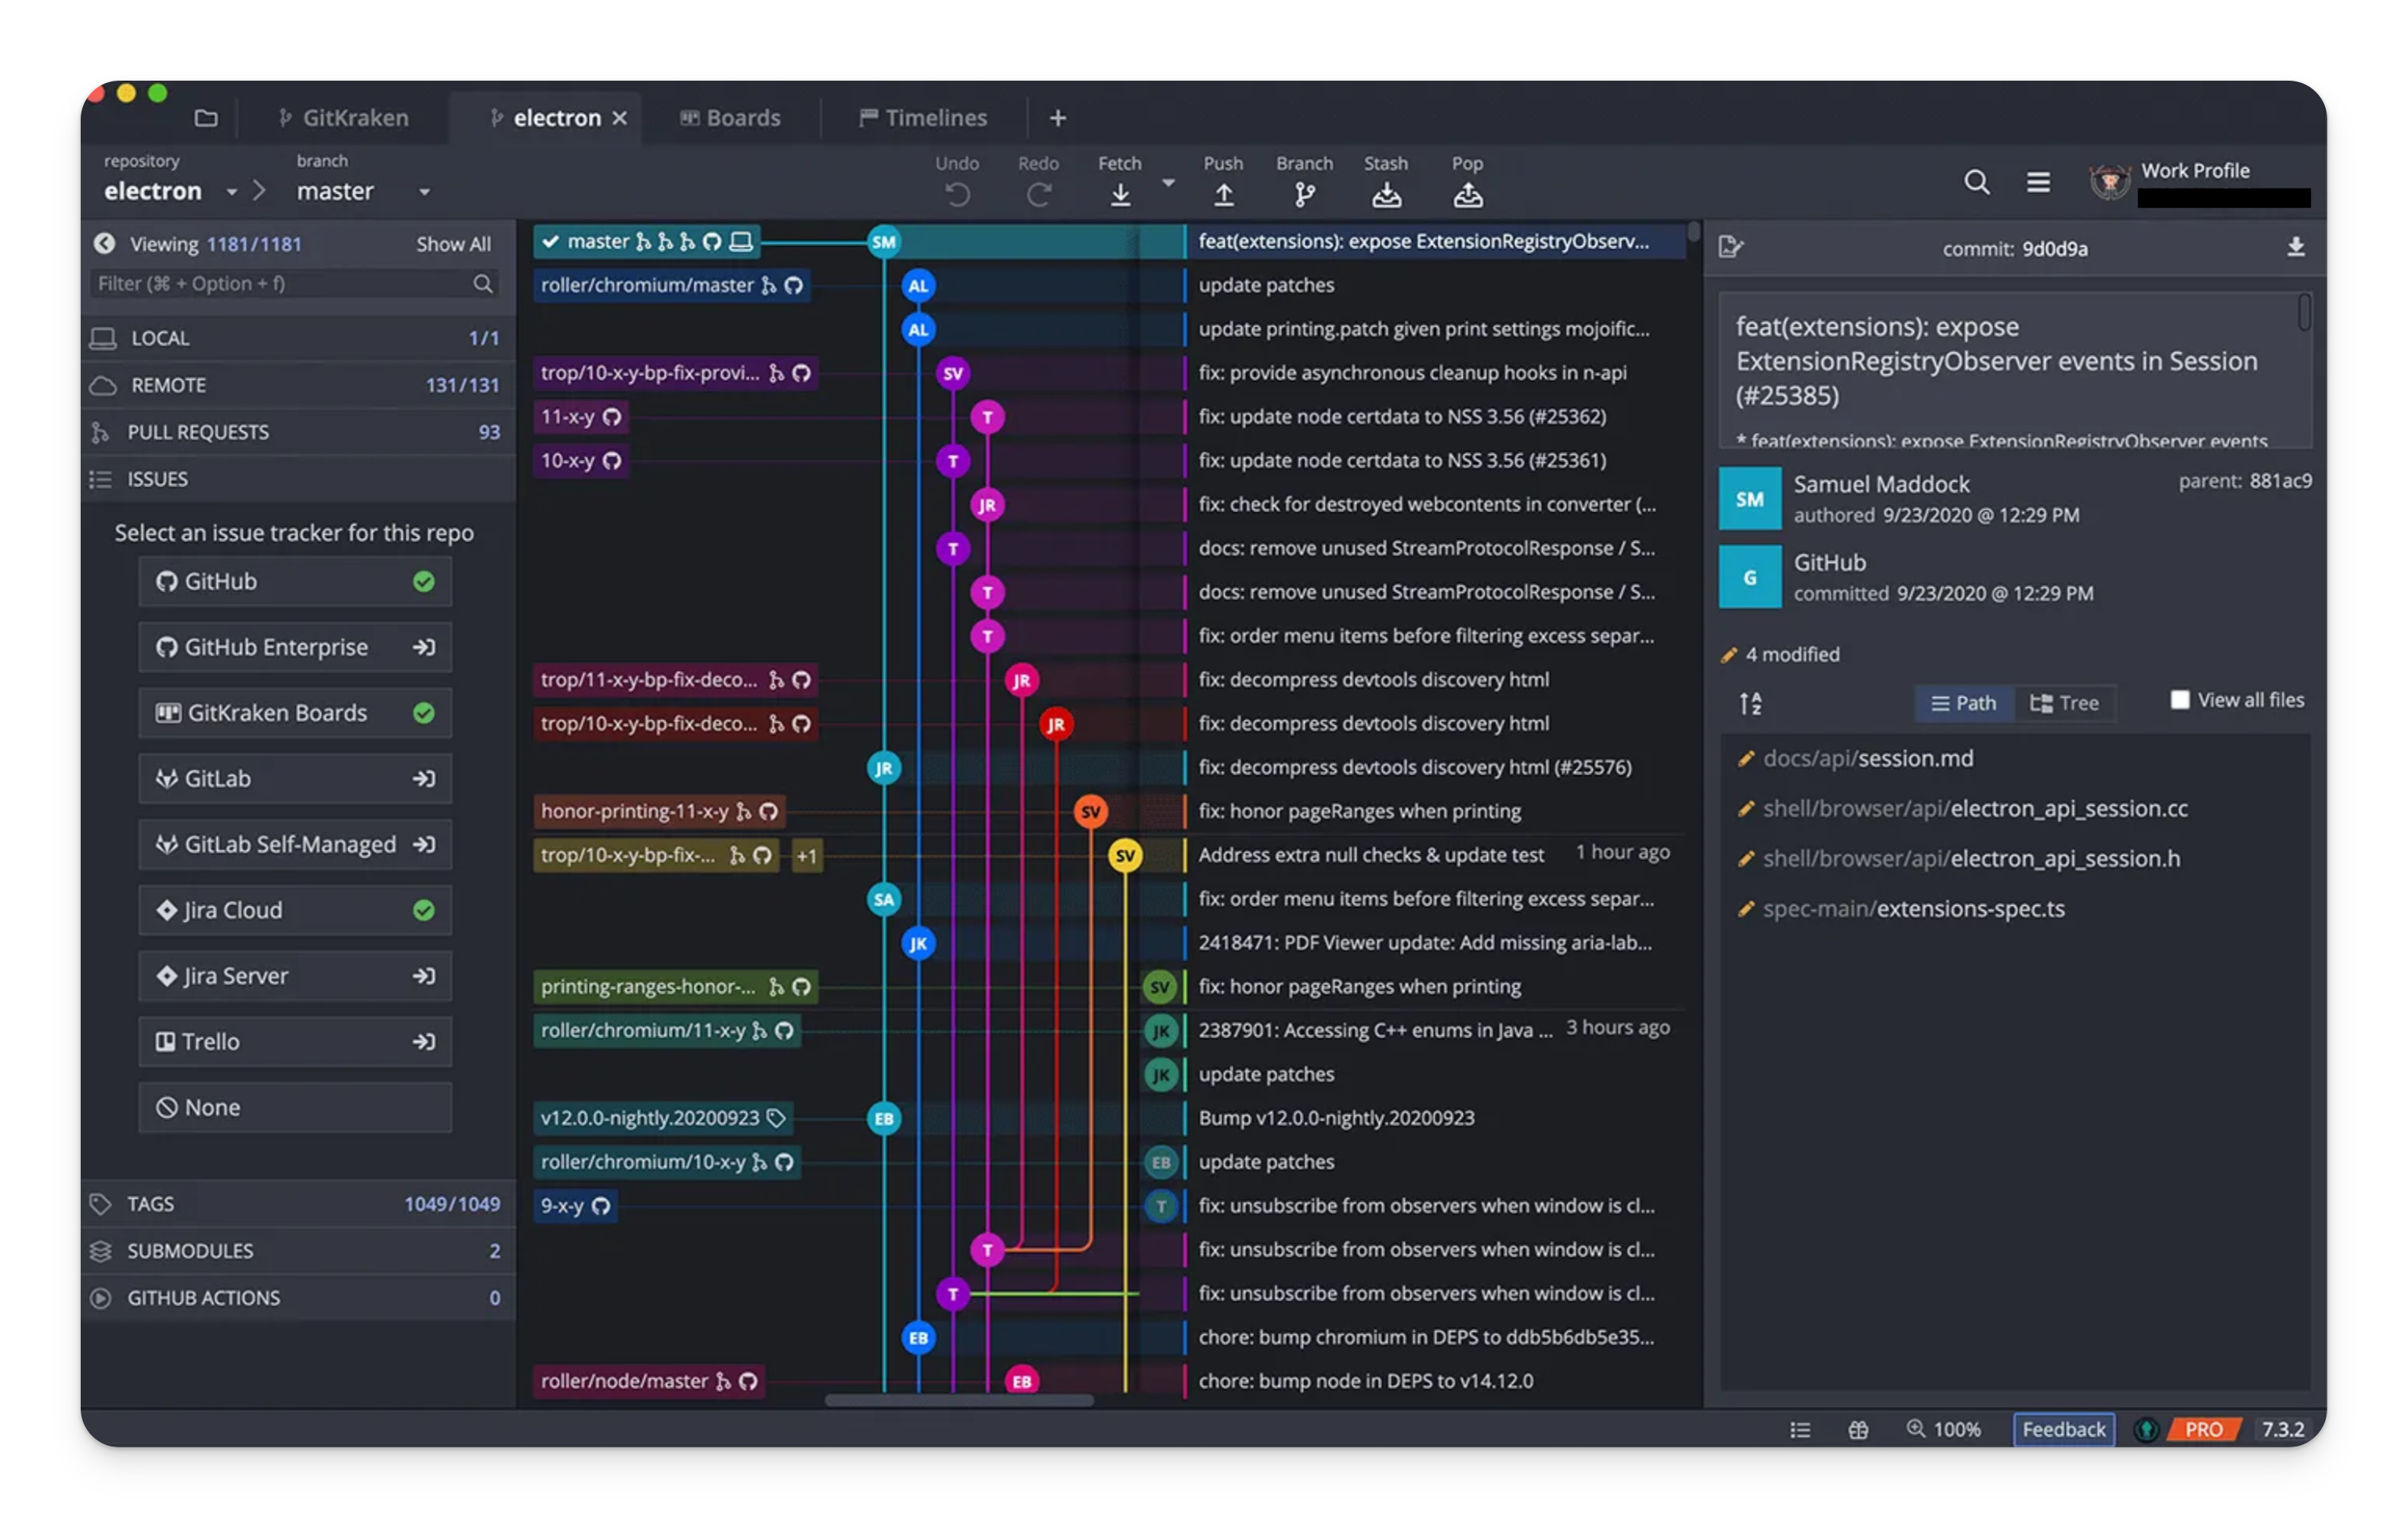 GitKraken was launched in 2014 by Axosoft, with the aim to provide a more visually appealing and user-friendly way to manage Git repositories. It quickly gained recognition for its sleek design and intuitive graphical interface, acquiring a substantial user base in a relatively short amount of time.